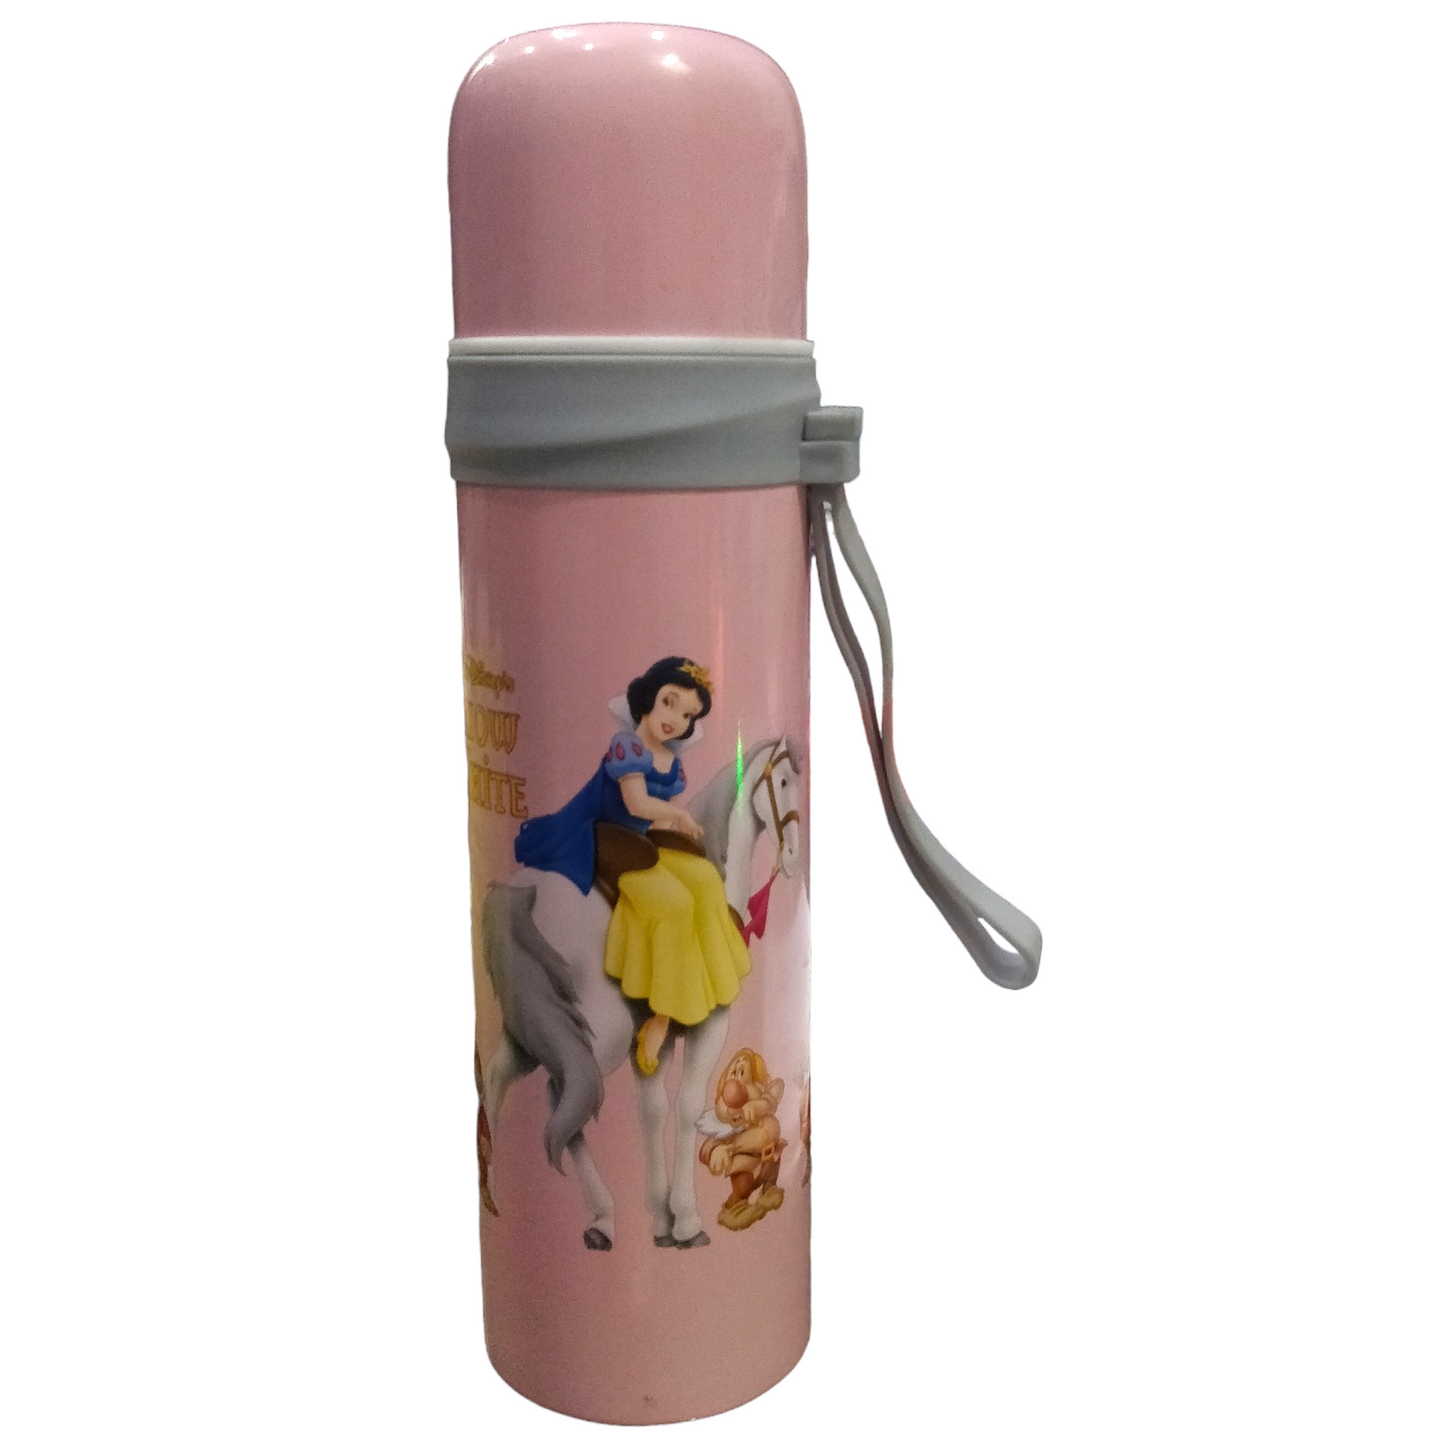 Snow White Insulated Water Bottle